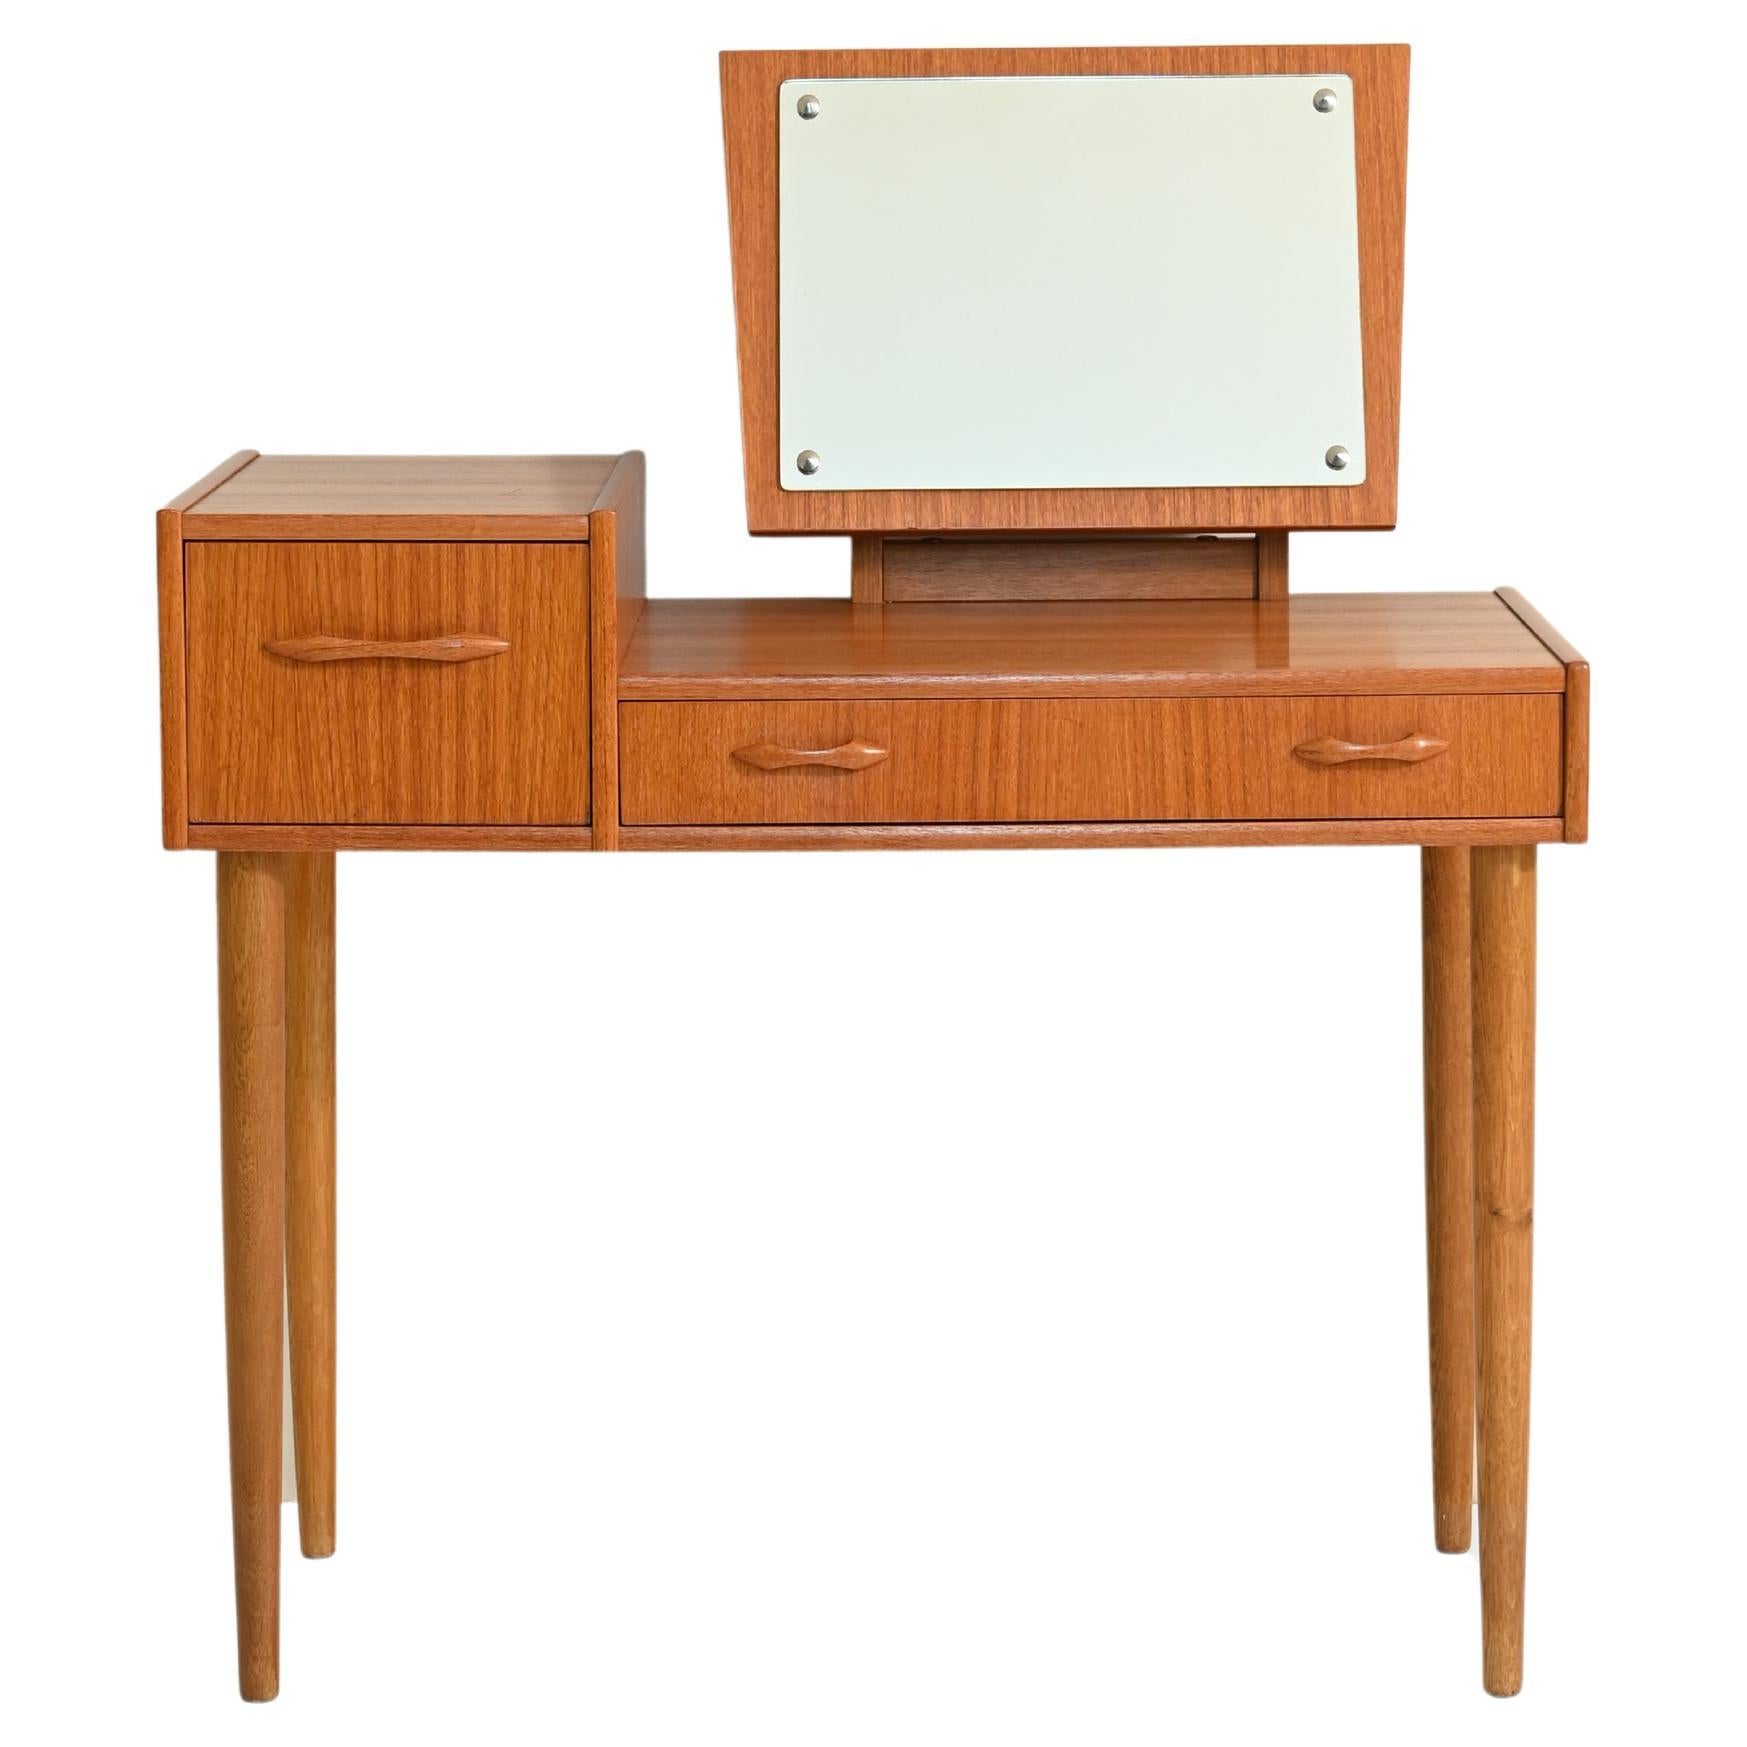 Vintage Dressing Table with Mirror / Small Danish Desk